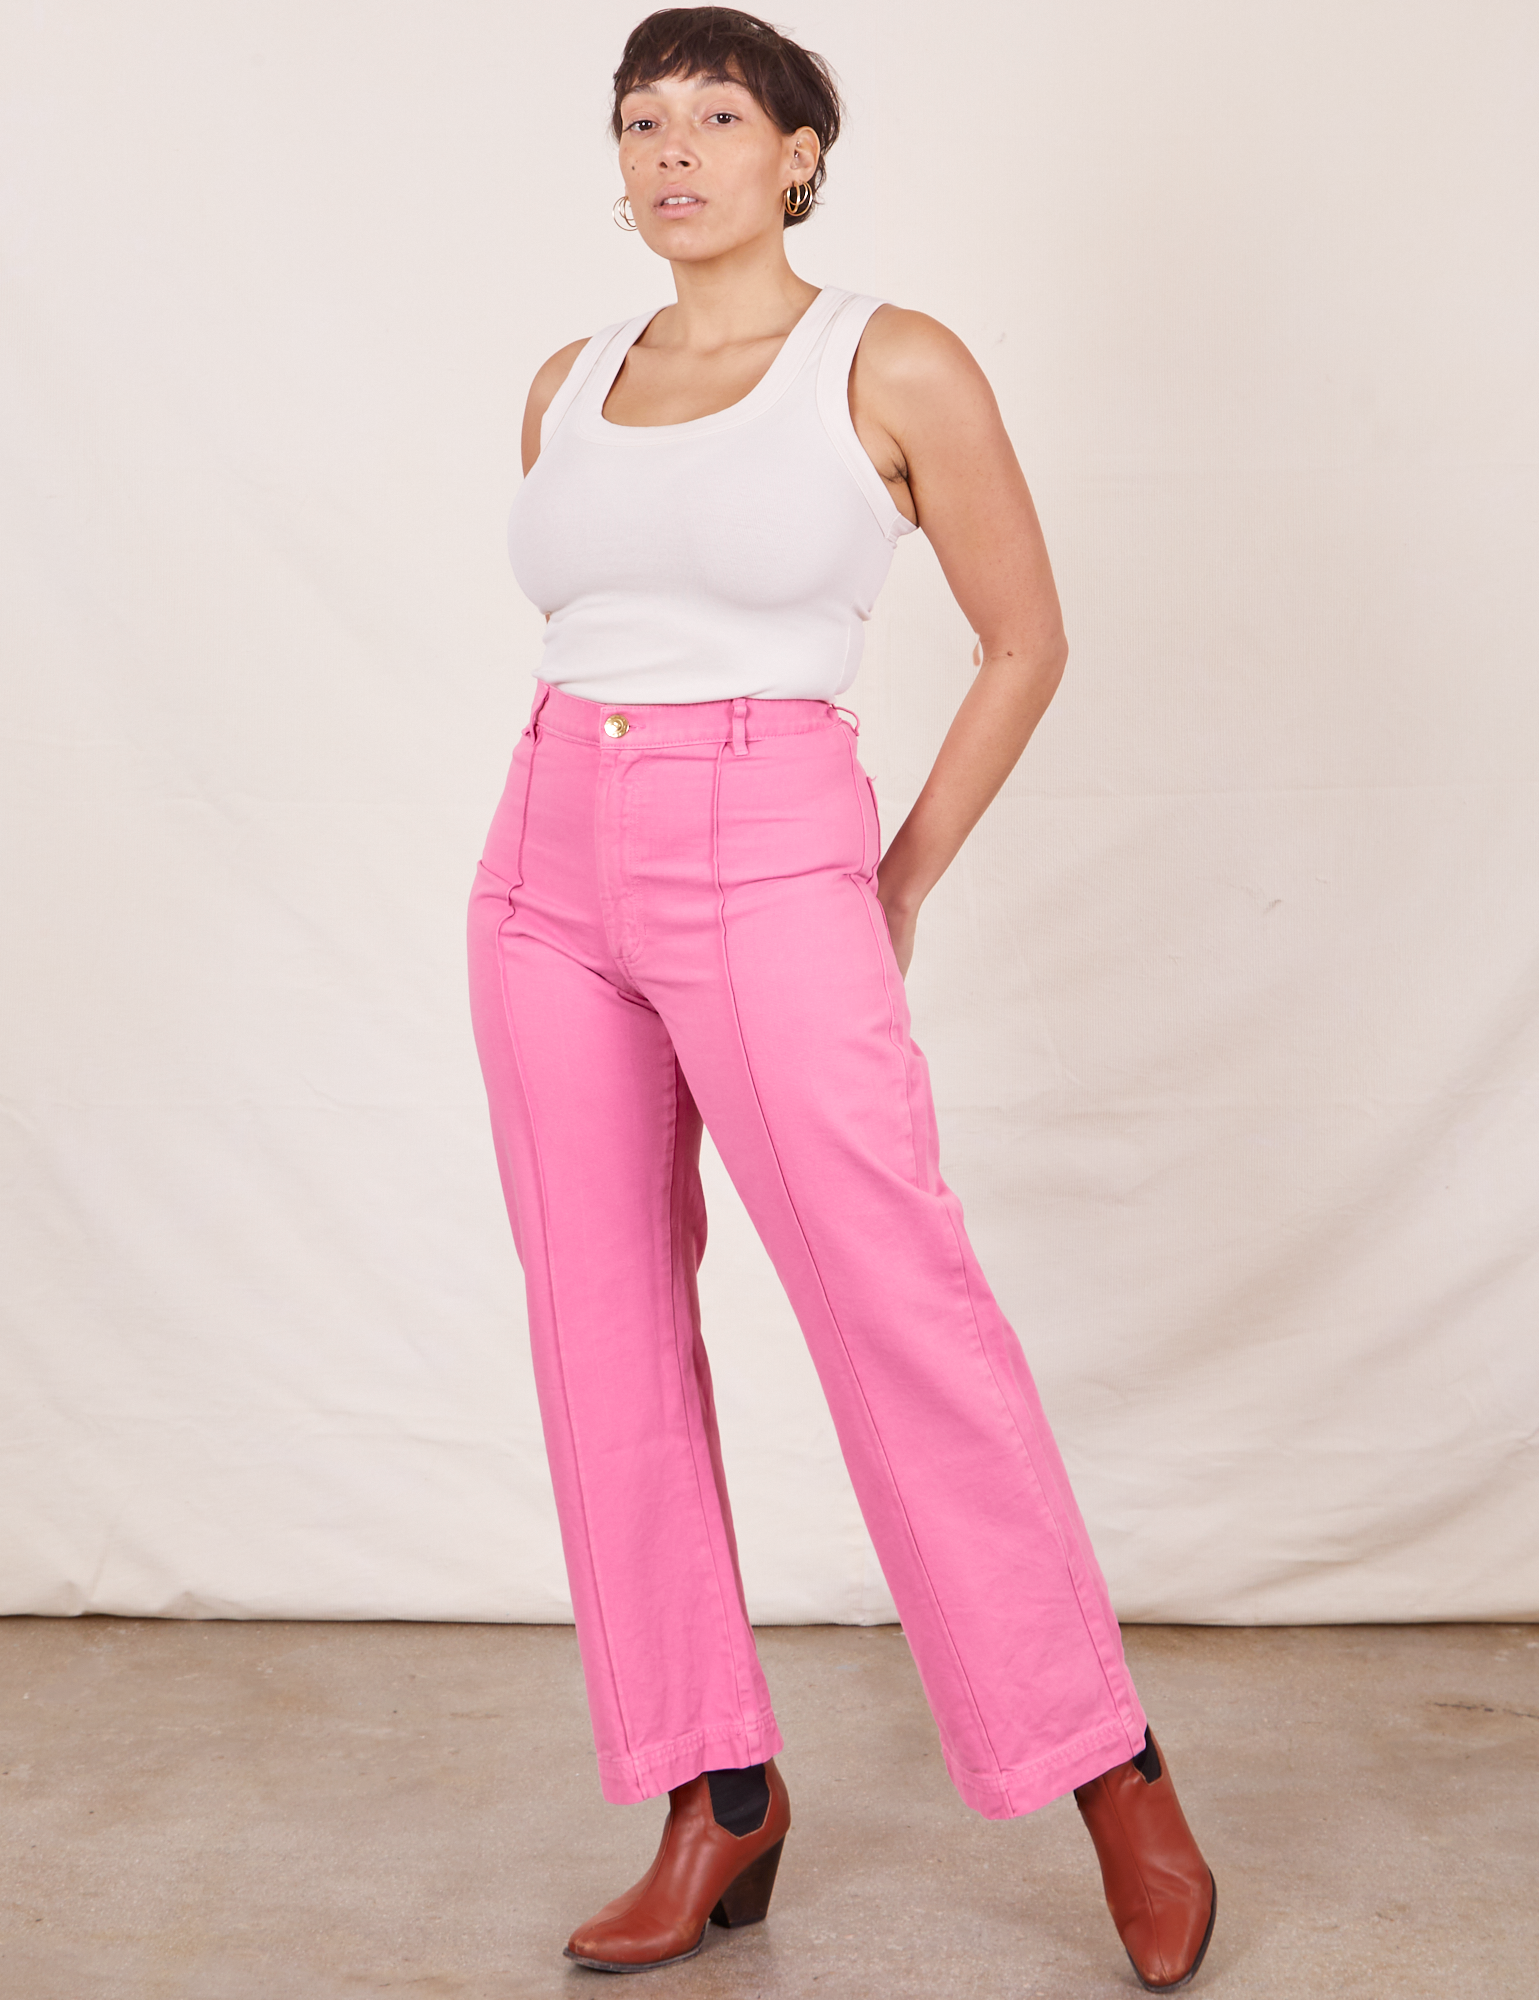 Tiara is 5'4" and wearing S Western Pants in Bubblegum Pink paired with Tank Top in vintage tee off-white